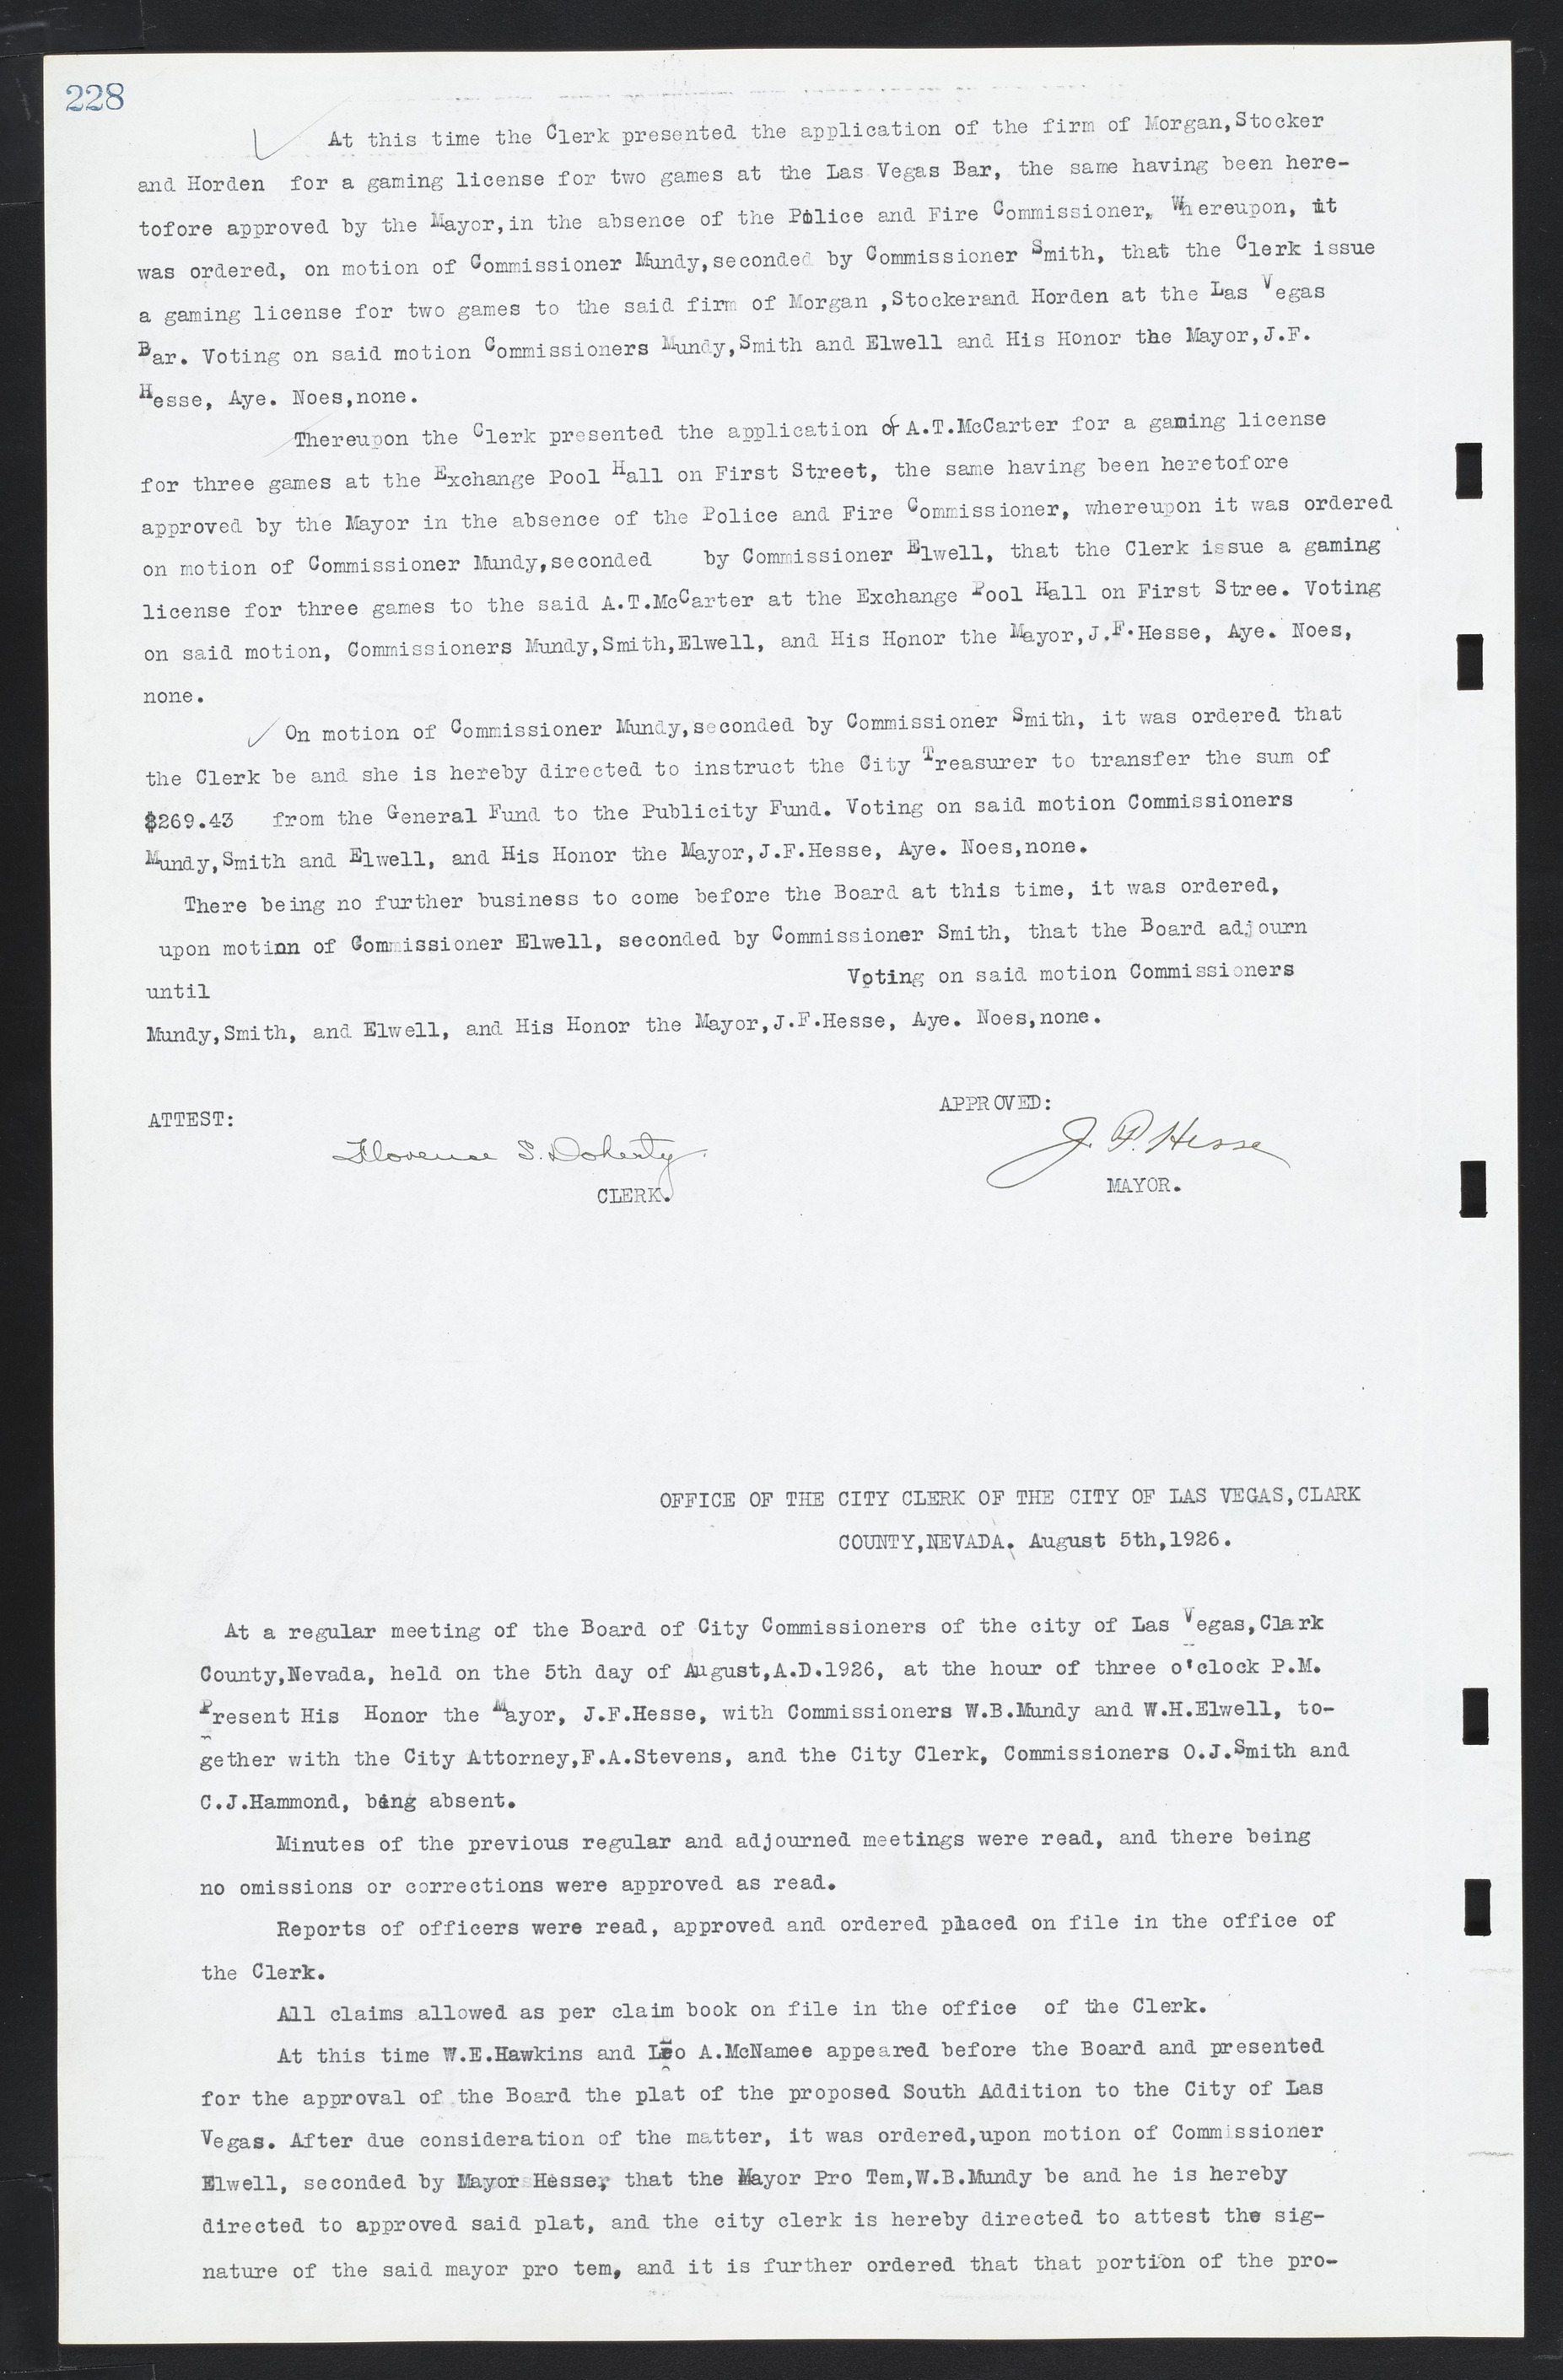 Las Vegas City Commission Minutes, March 1, 1922 to May 10, 1929, lvc000002-235